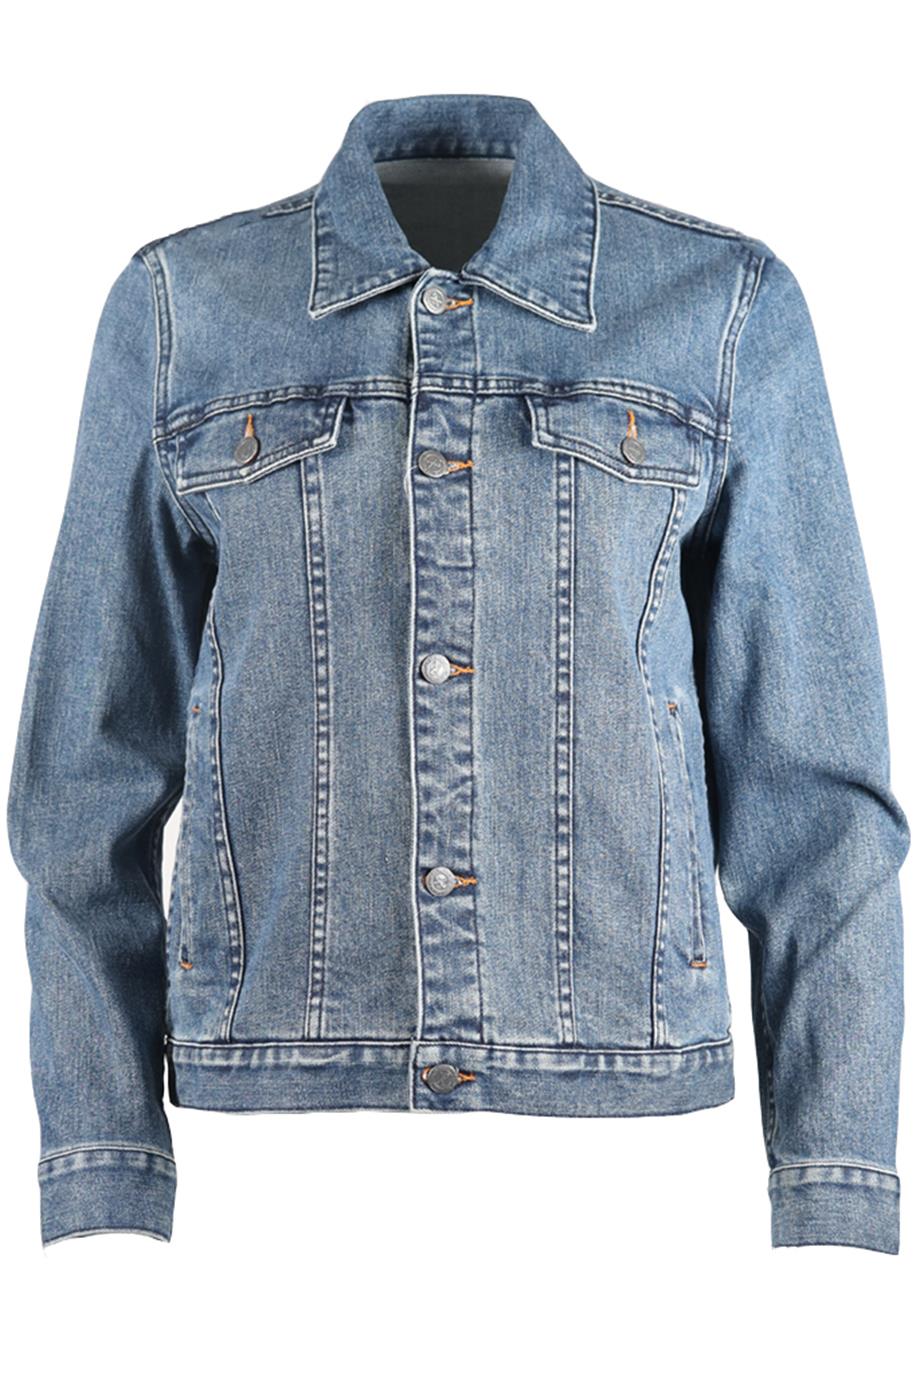 APC Denim Jacket, Women's Fashion, Coats, Jackets and Outerwear on Carousell